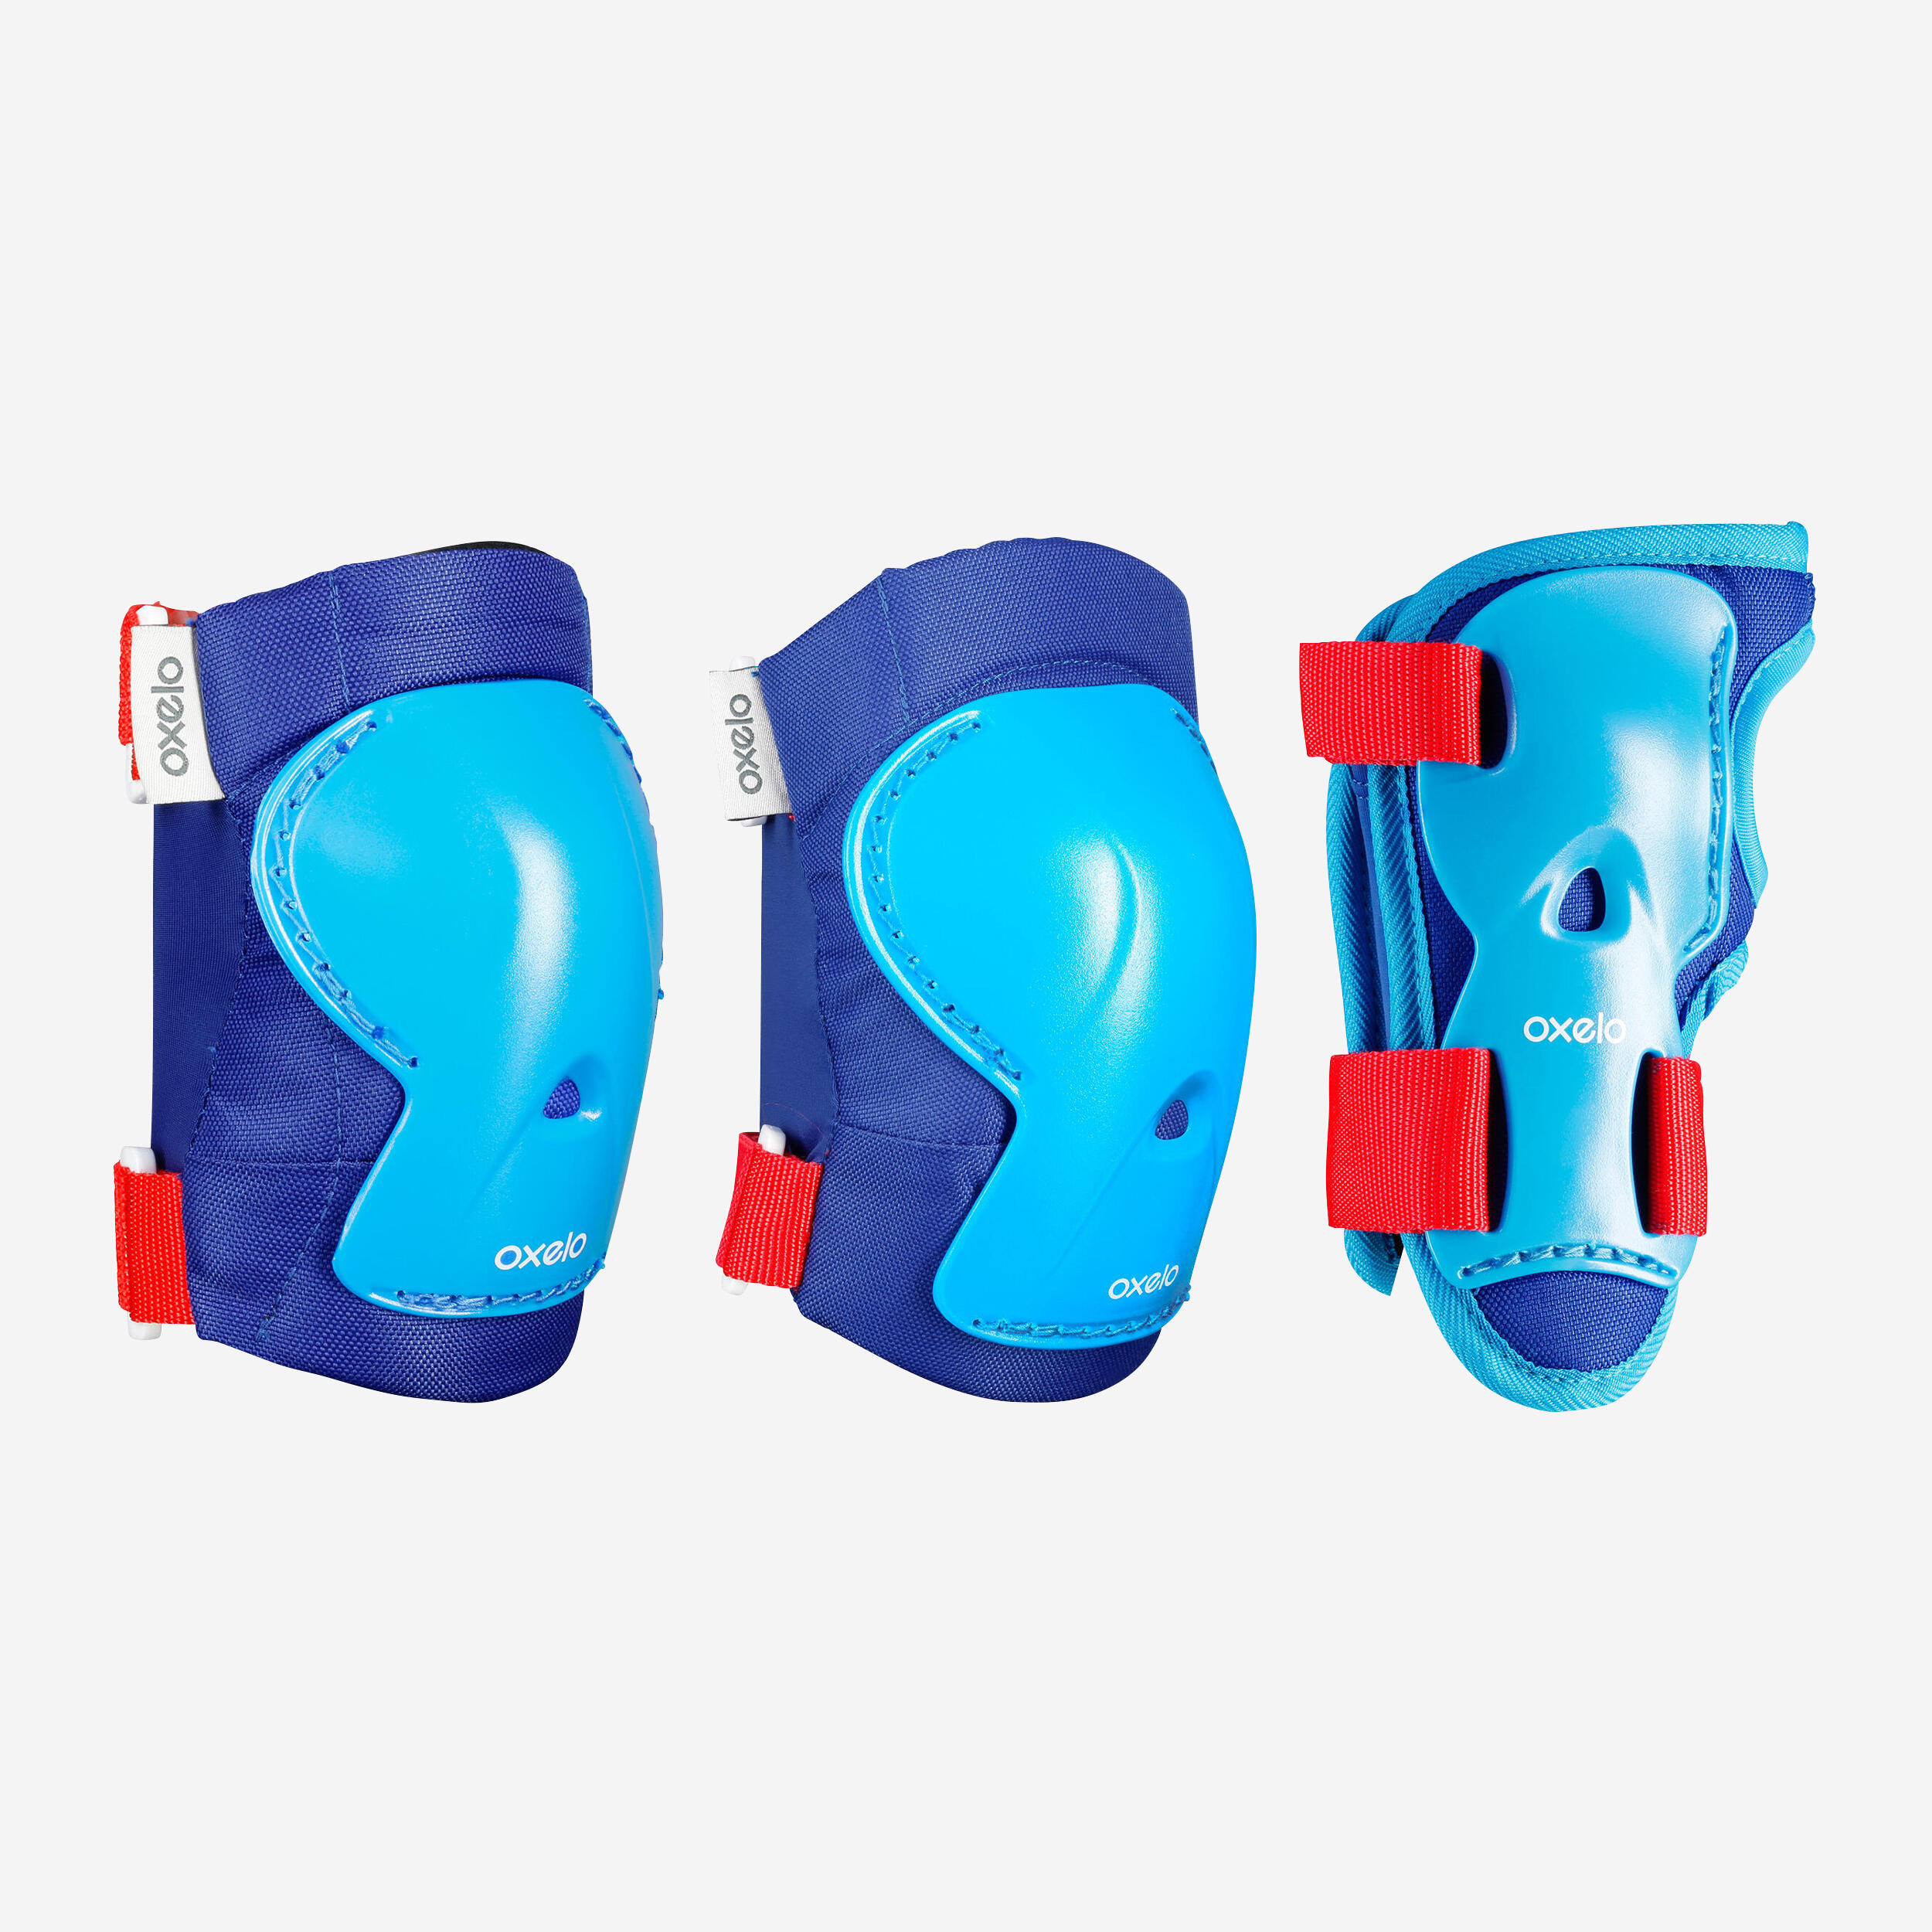 https://contents.mediadecathlon.com/p2599080/k$e0b737bc6487d0f5c74289393fa1dd28/kids-2-x-3-piece-inline-skating-scooter-skateboard-protective-gear-play-blue-oxelo-8370355.jpg